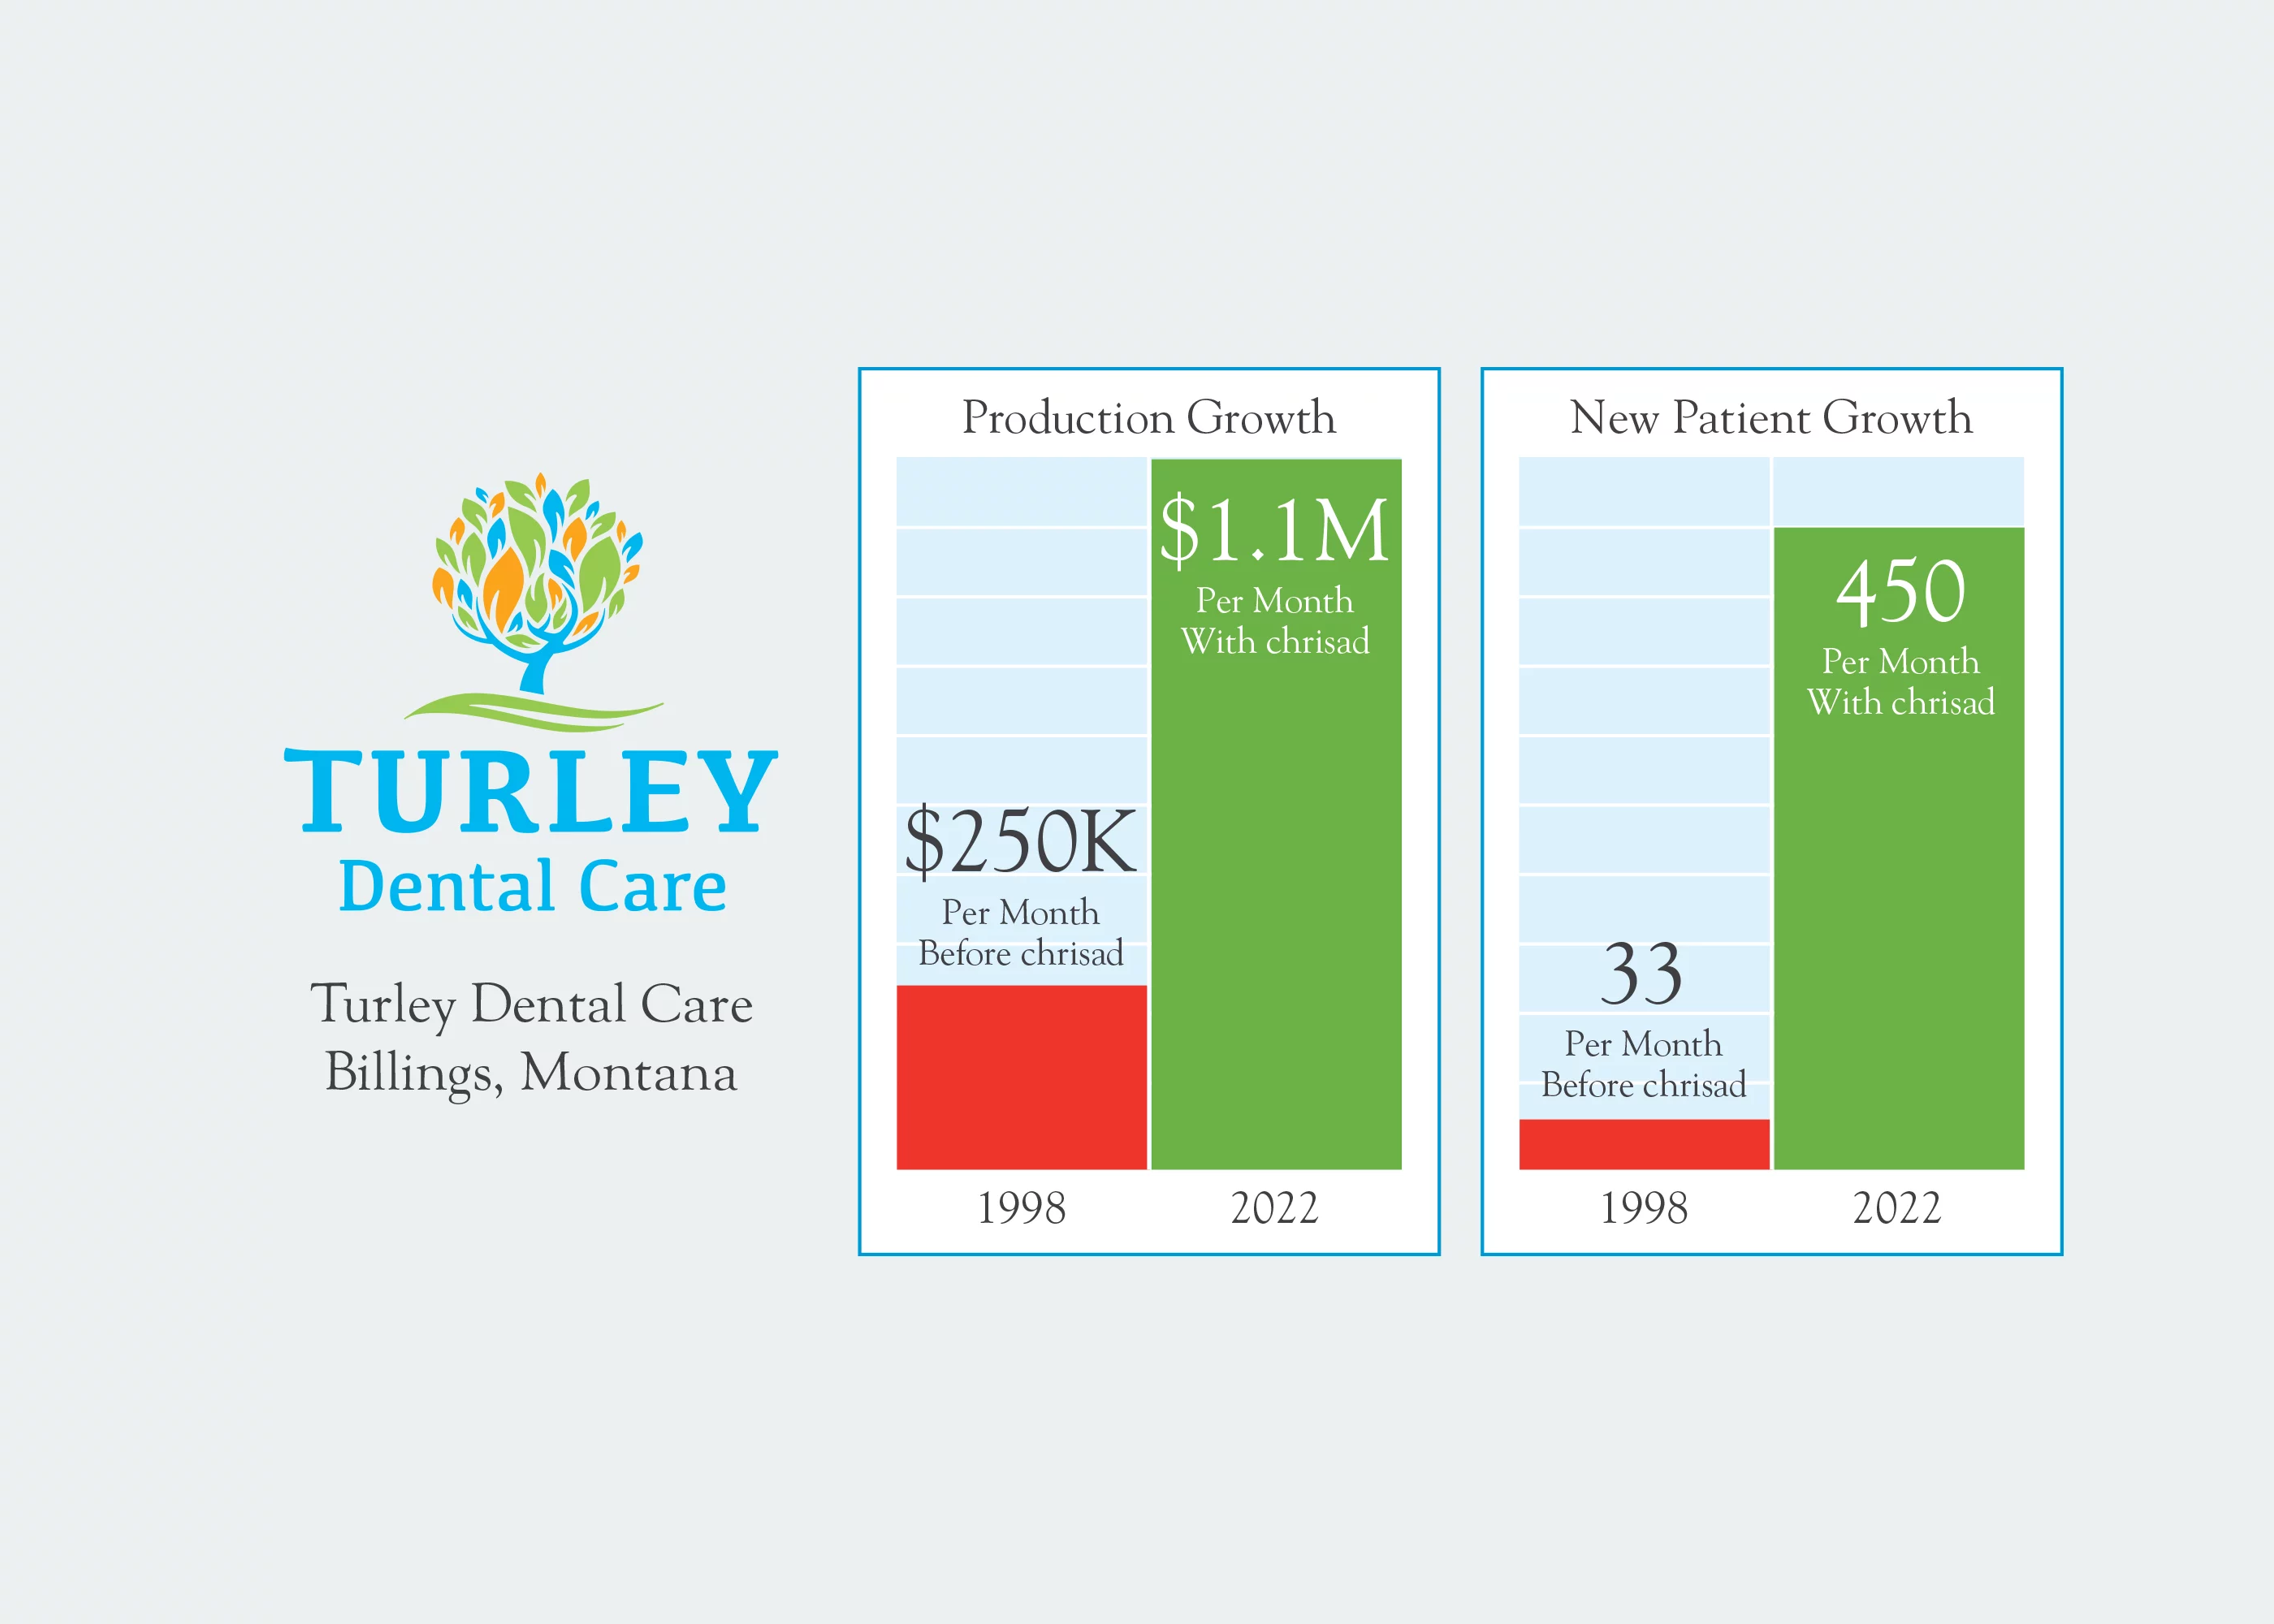 Turley Dental Care production chart